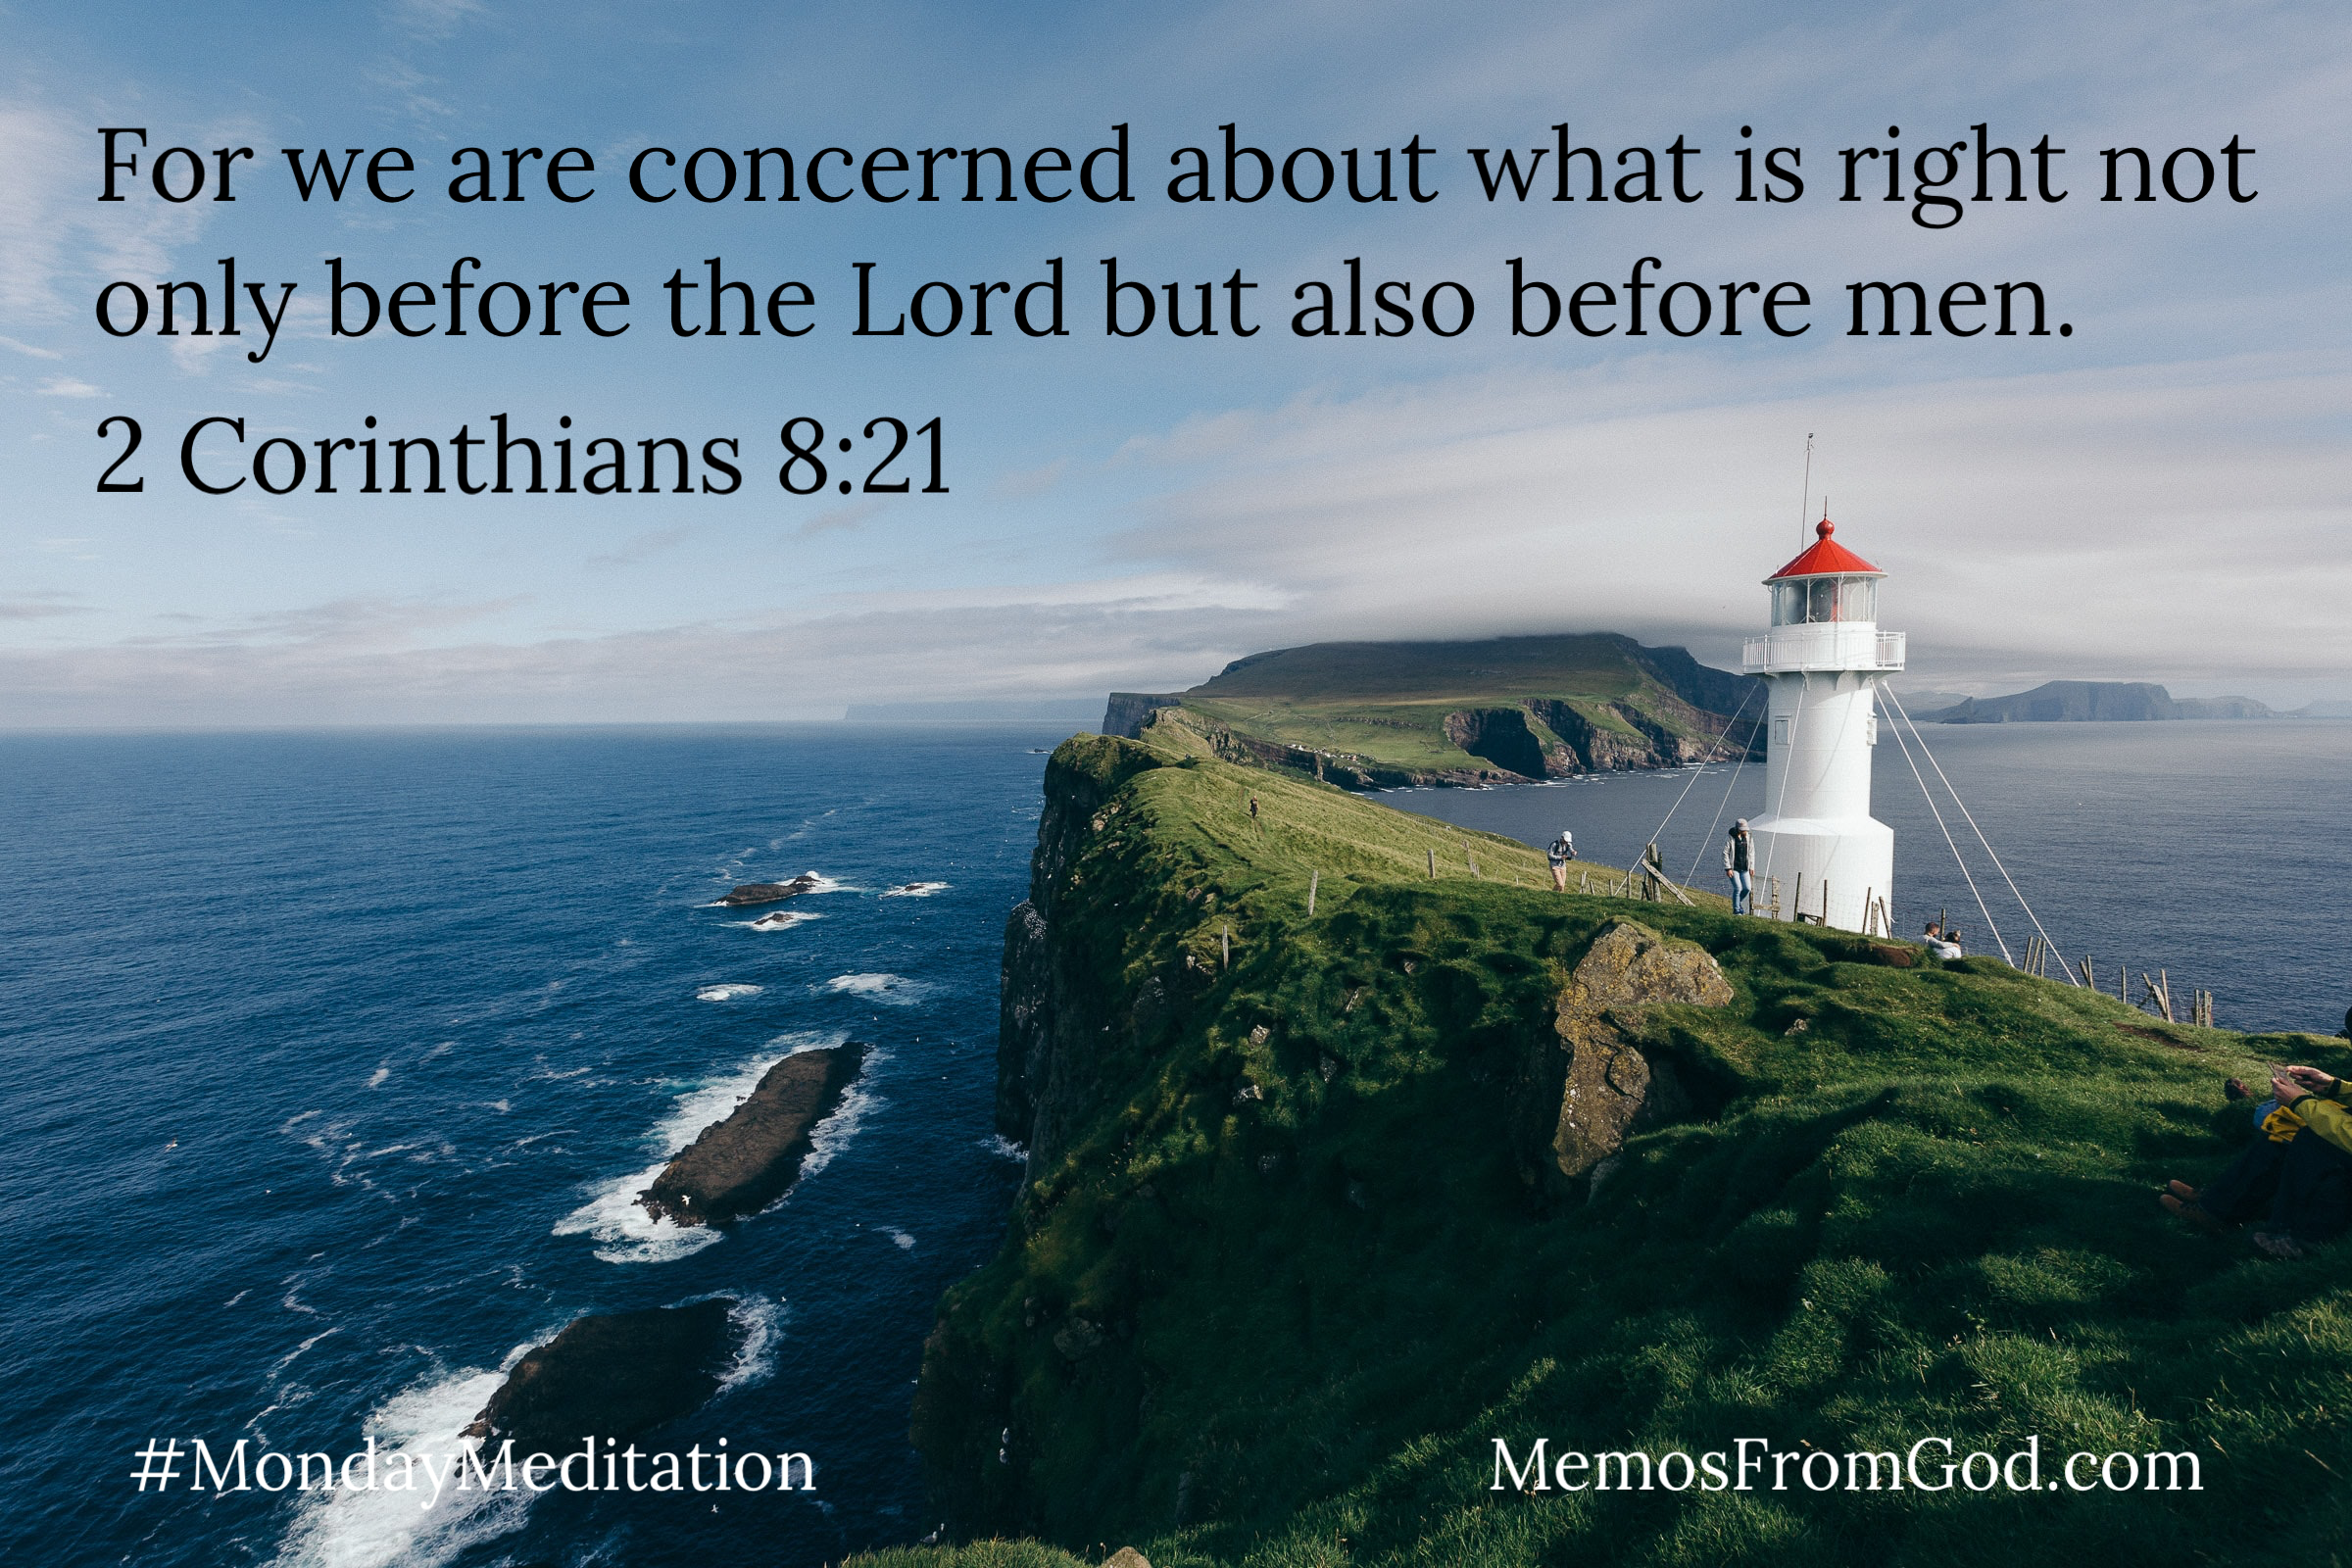 For we are concerned about what is right not only before the Lord but also before men. 2 Corinthians 8:21